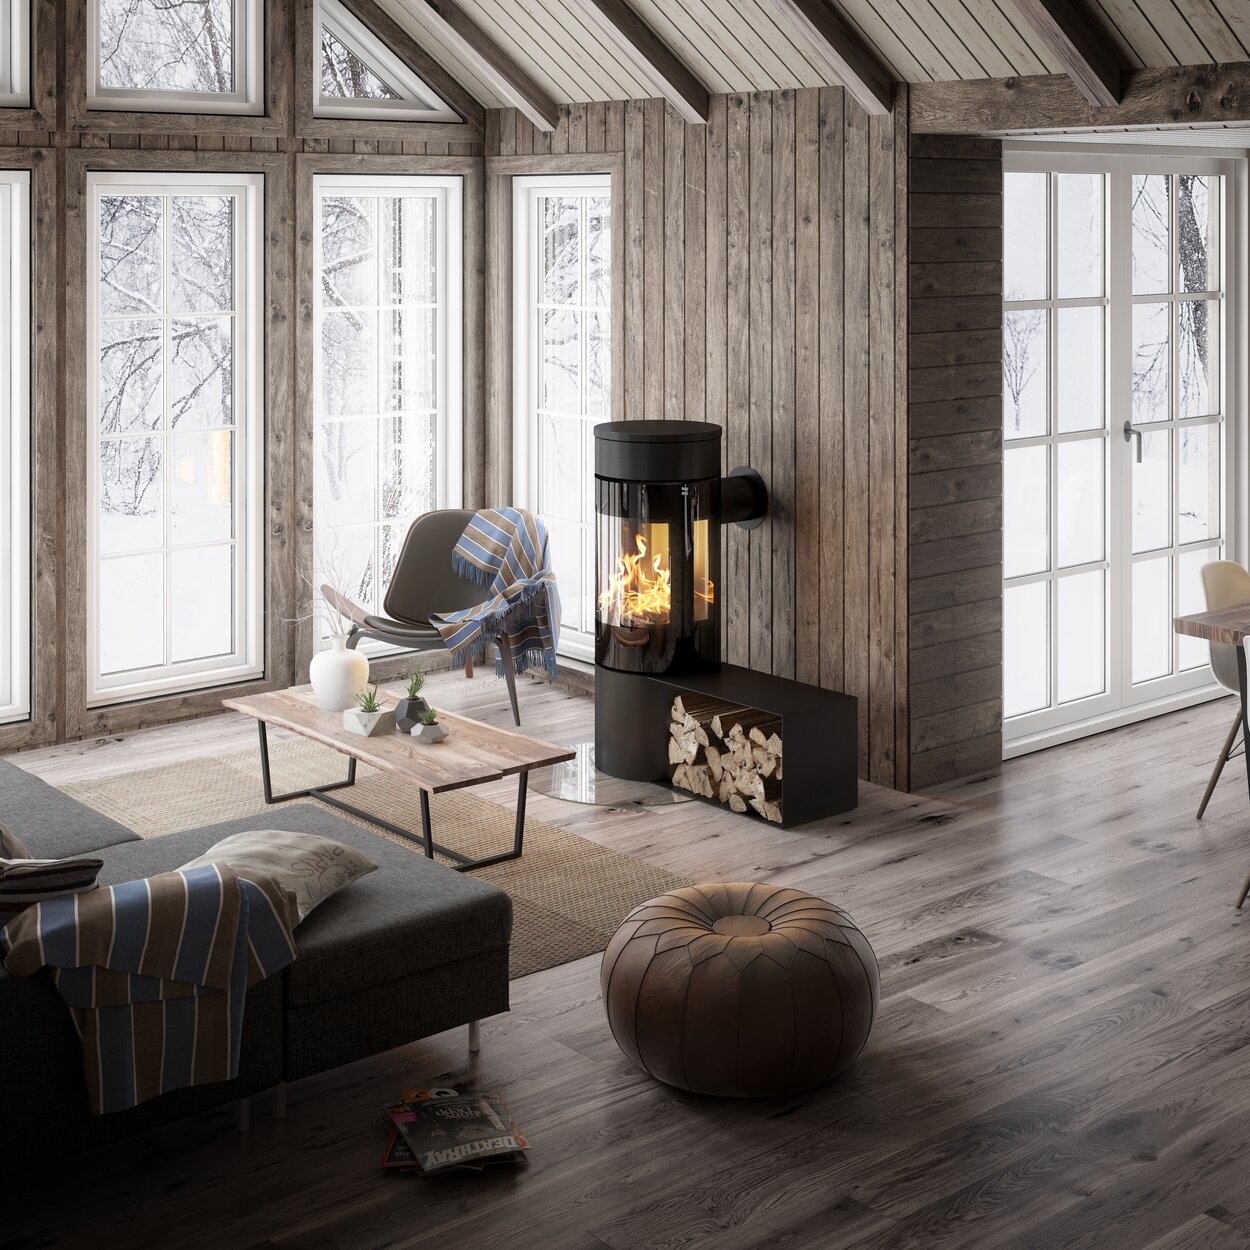 Wood stove VIVA 120 L in black with side bench in a modern wooden house in the forest